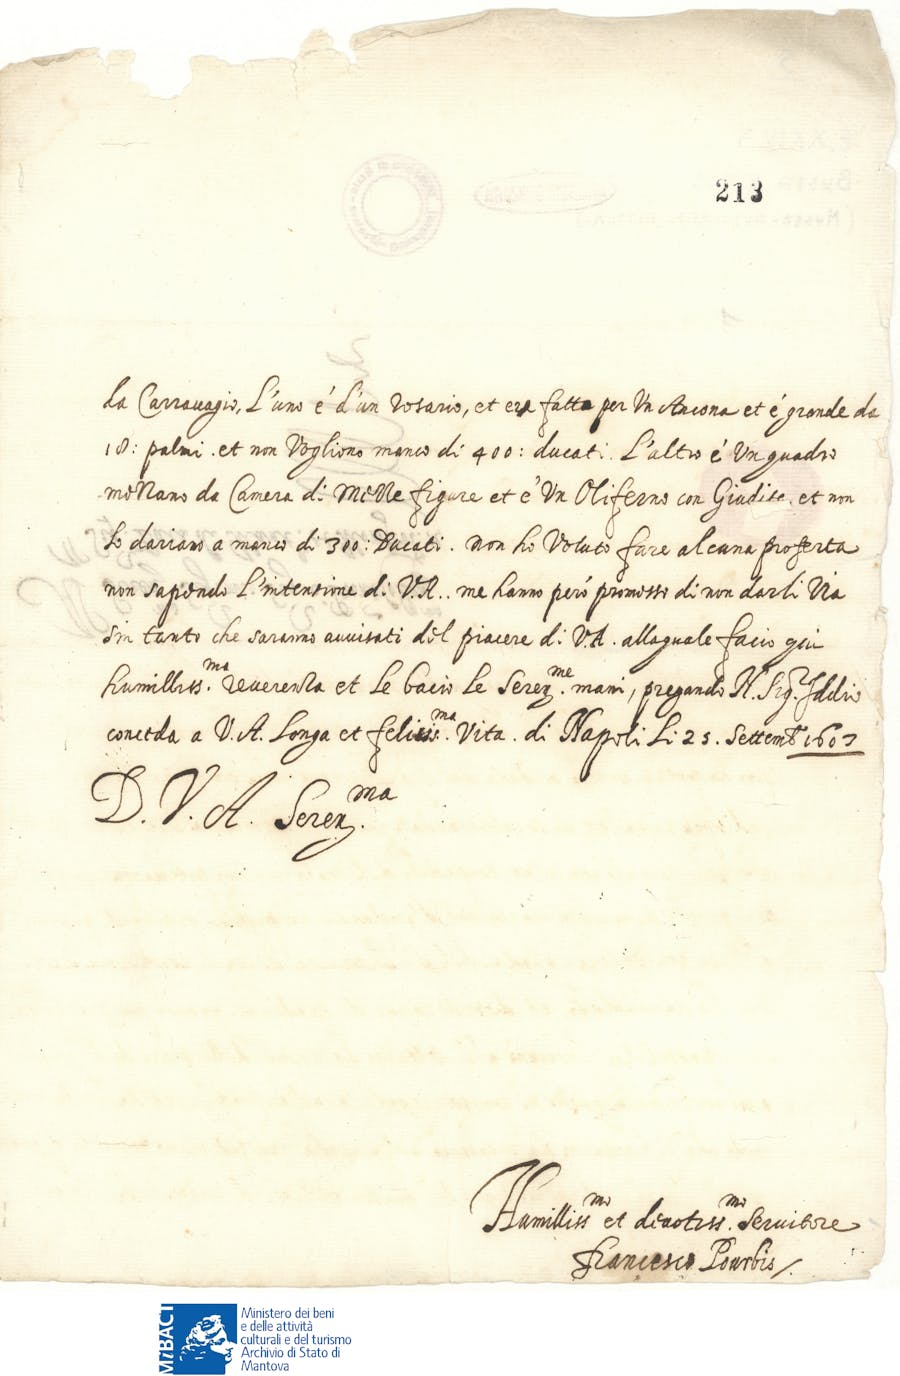 Letter by the painter Frans Pourbus to the Duke of Mantua on 25 September 1607, image © Ministry for Cultural Goods and Activities via The Toulouse Caravaggio